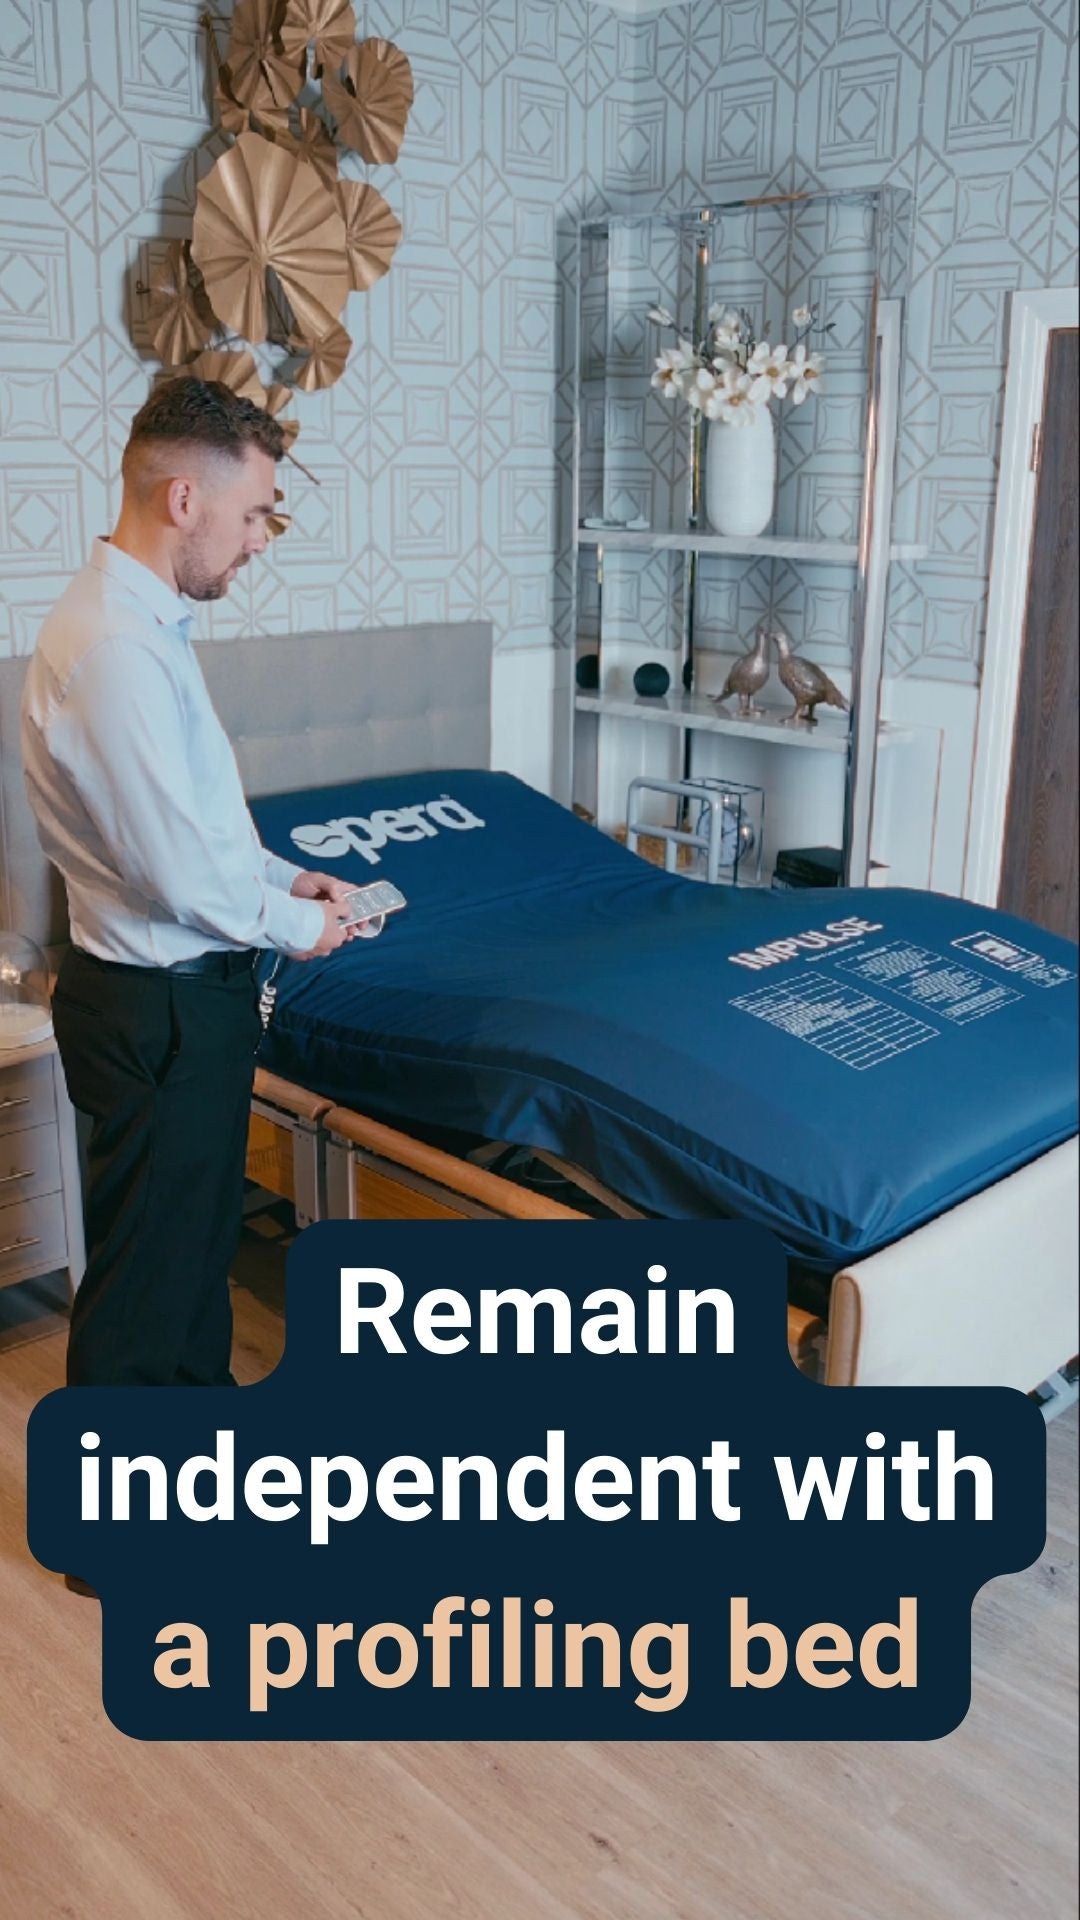 A man stood next to a profiling bed with the caption 'Remain independent with a profiling bed'